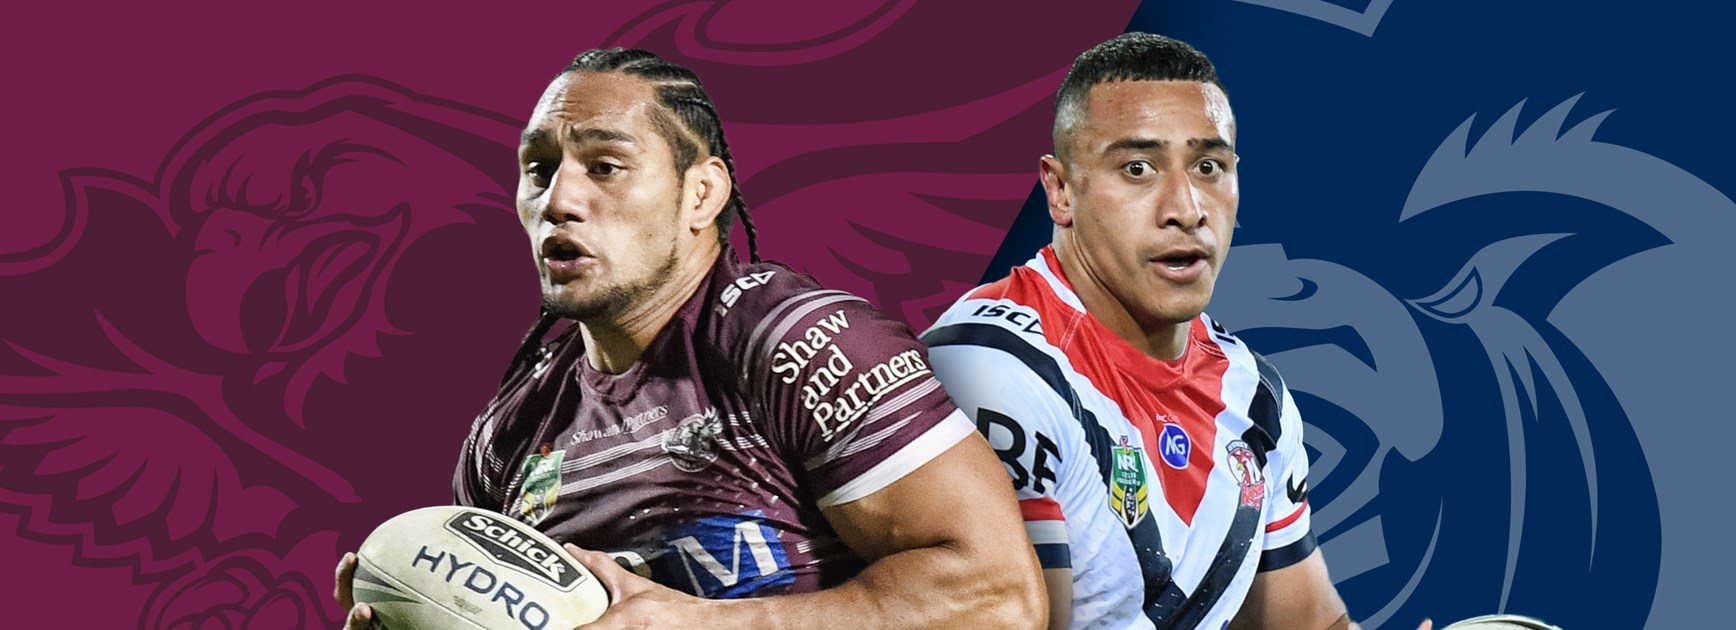 Sea Eagles v Roosters: Lane to bench, Matterson in for Liu